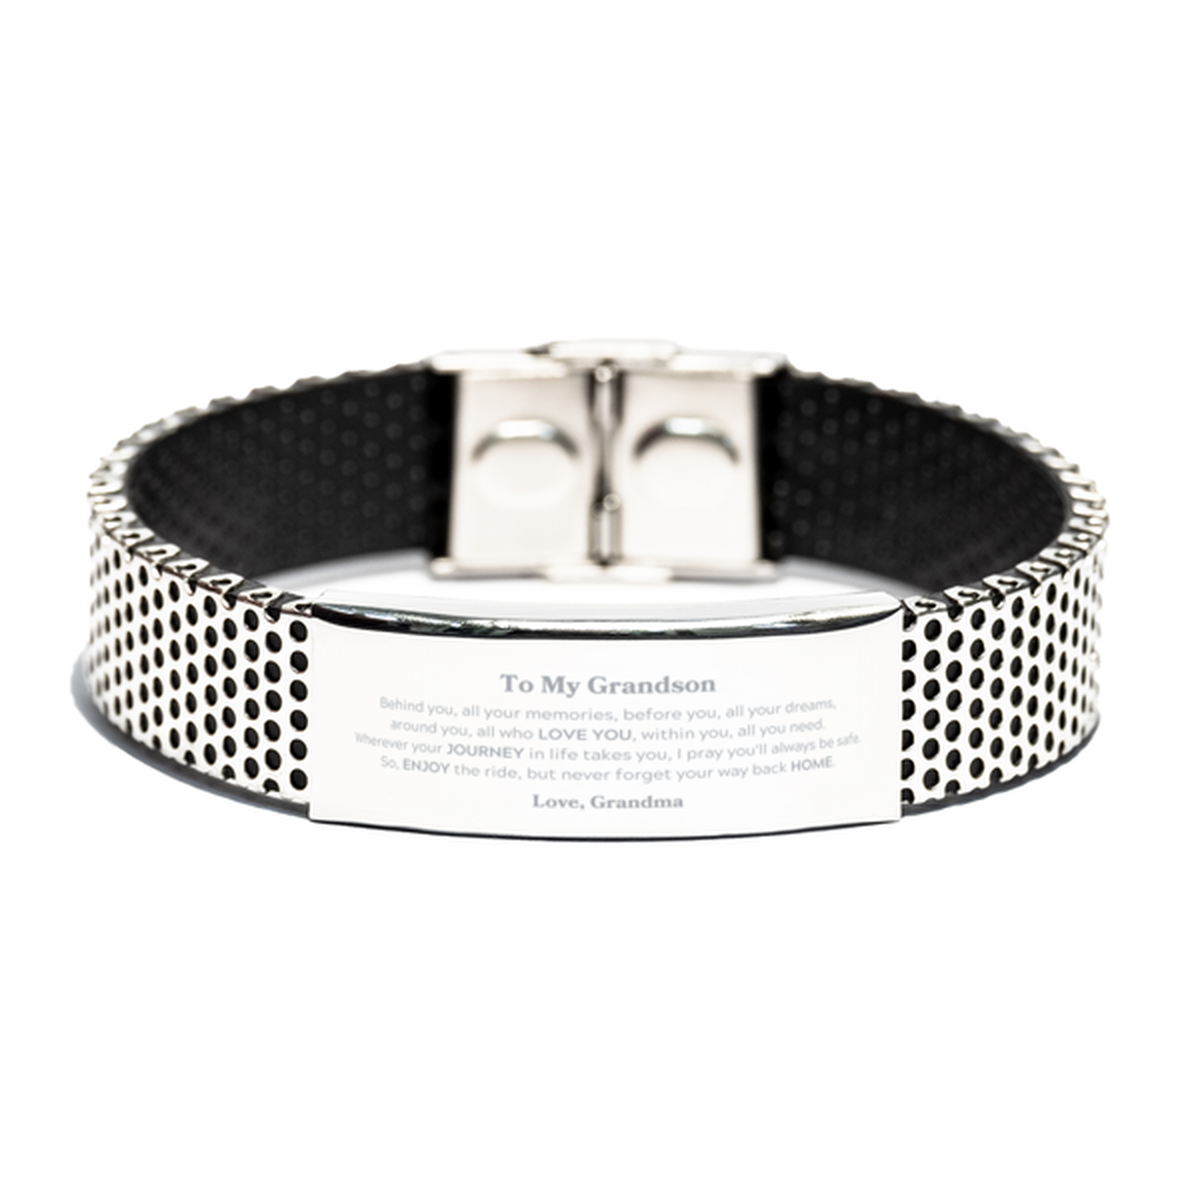 To My Grandson Graduation Gifts from Grandma, Grandson Stainless Steel Bracelet Christmas Birthday Gifts for Grandson Behind you, all your memories, before you, all your dreams. Love, Grandma